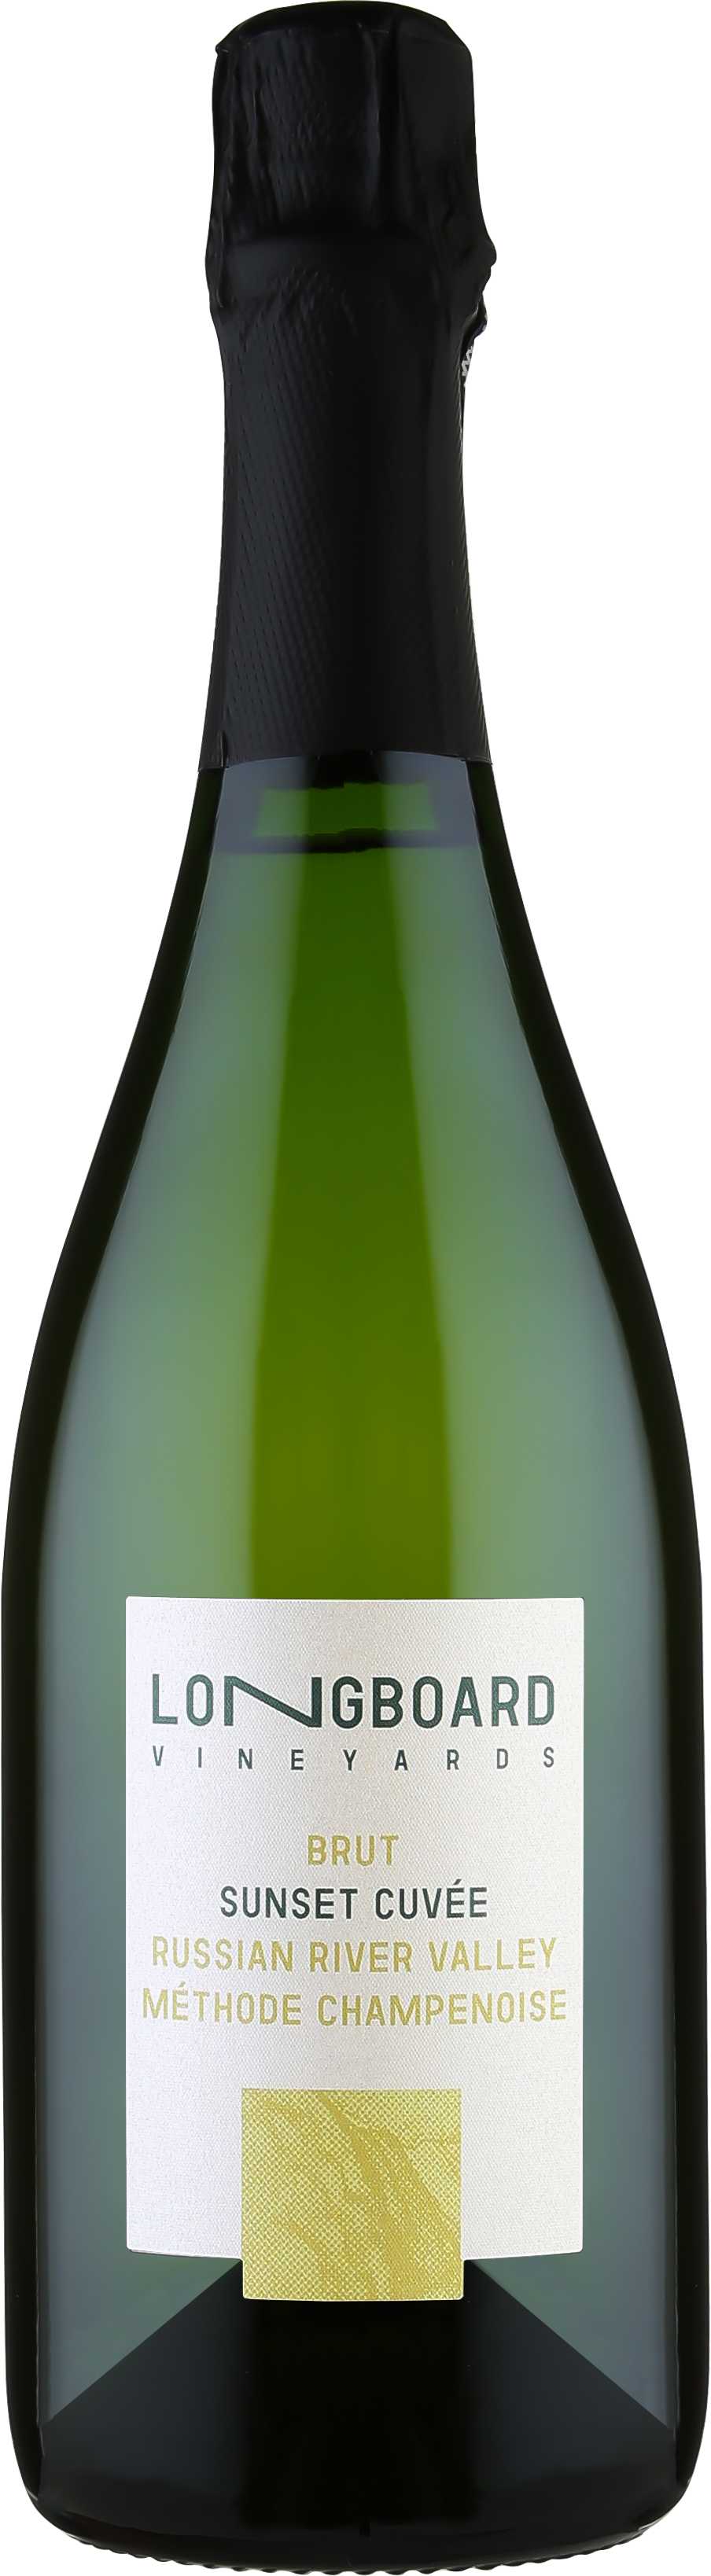 Brut - Sunset Cuvee (Prerelease to Wine Club only)